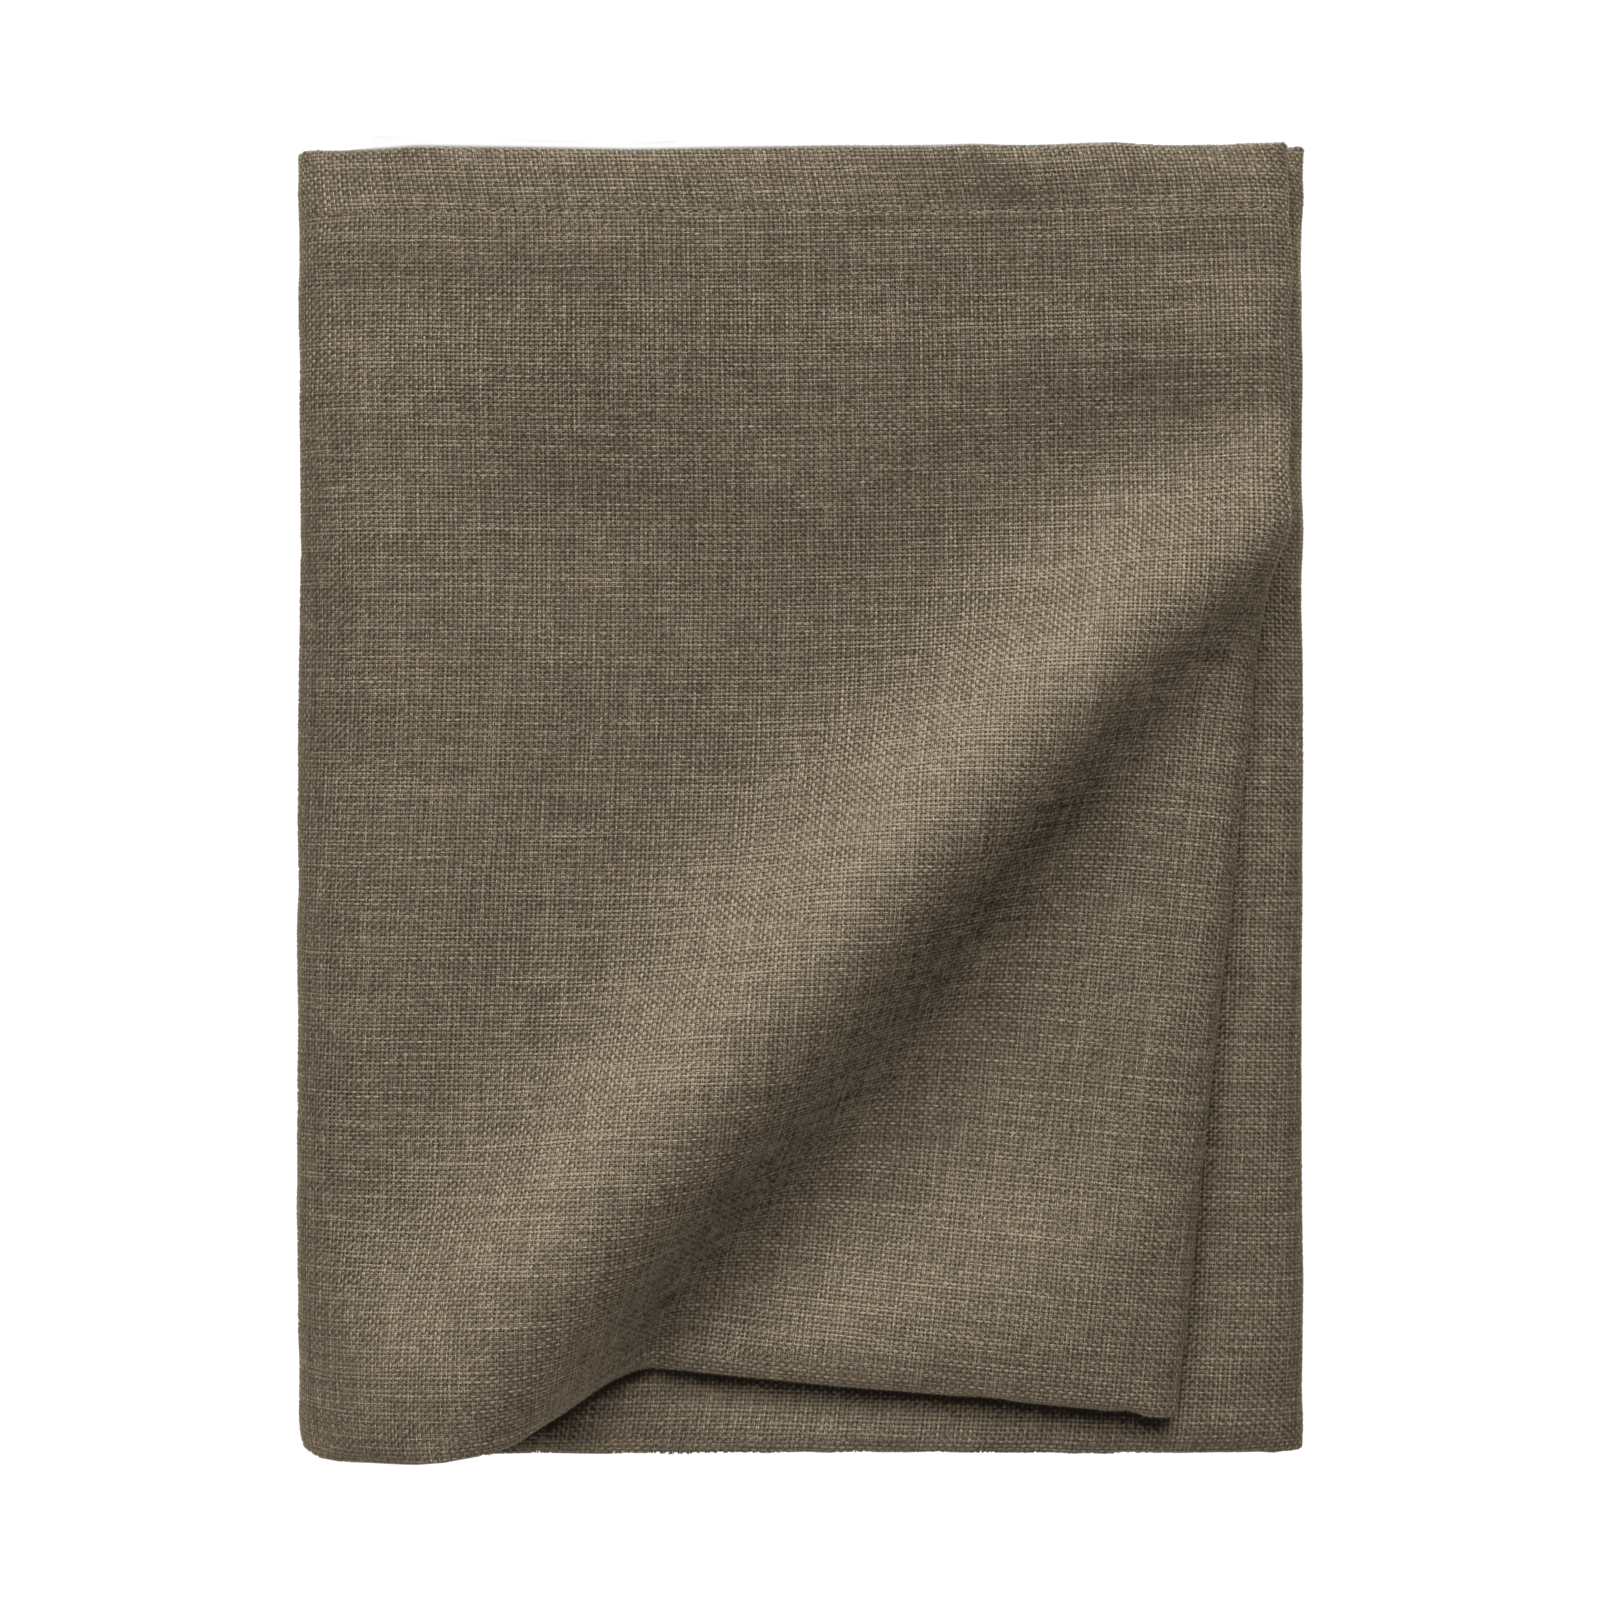 Größe: 130x 220 cm Farbe: taupe #farbe_taupe